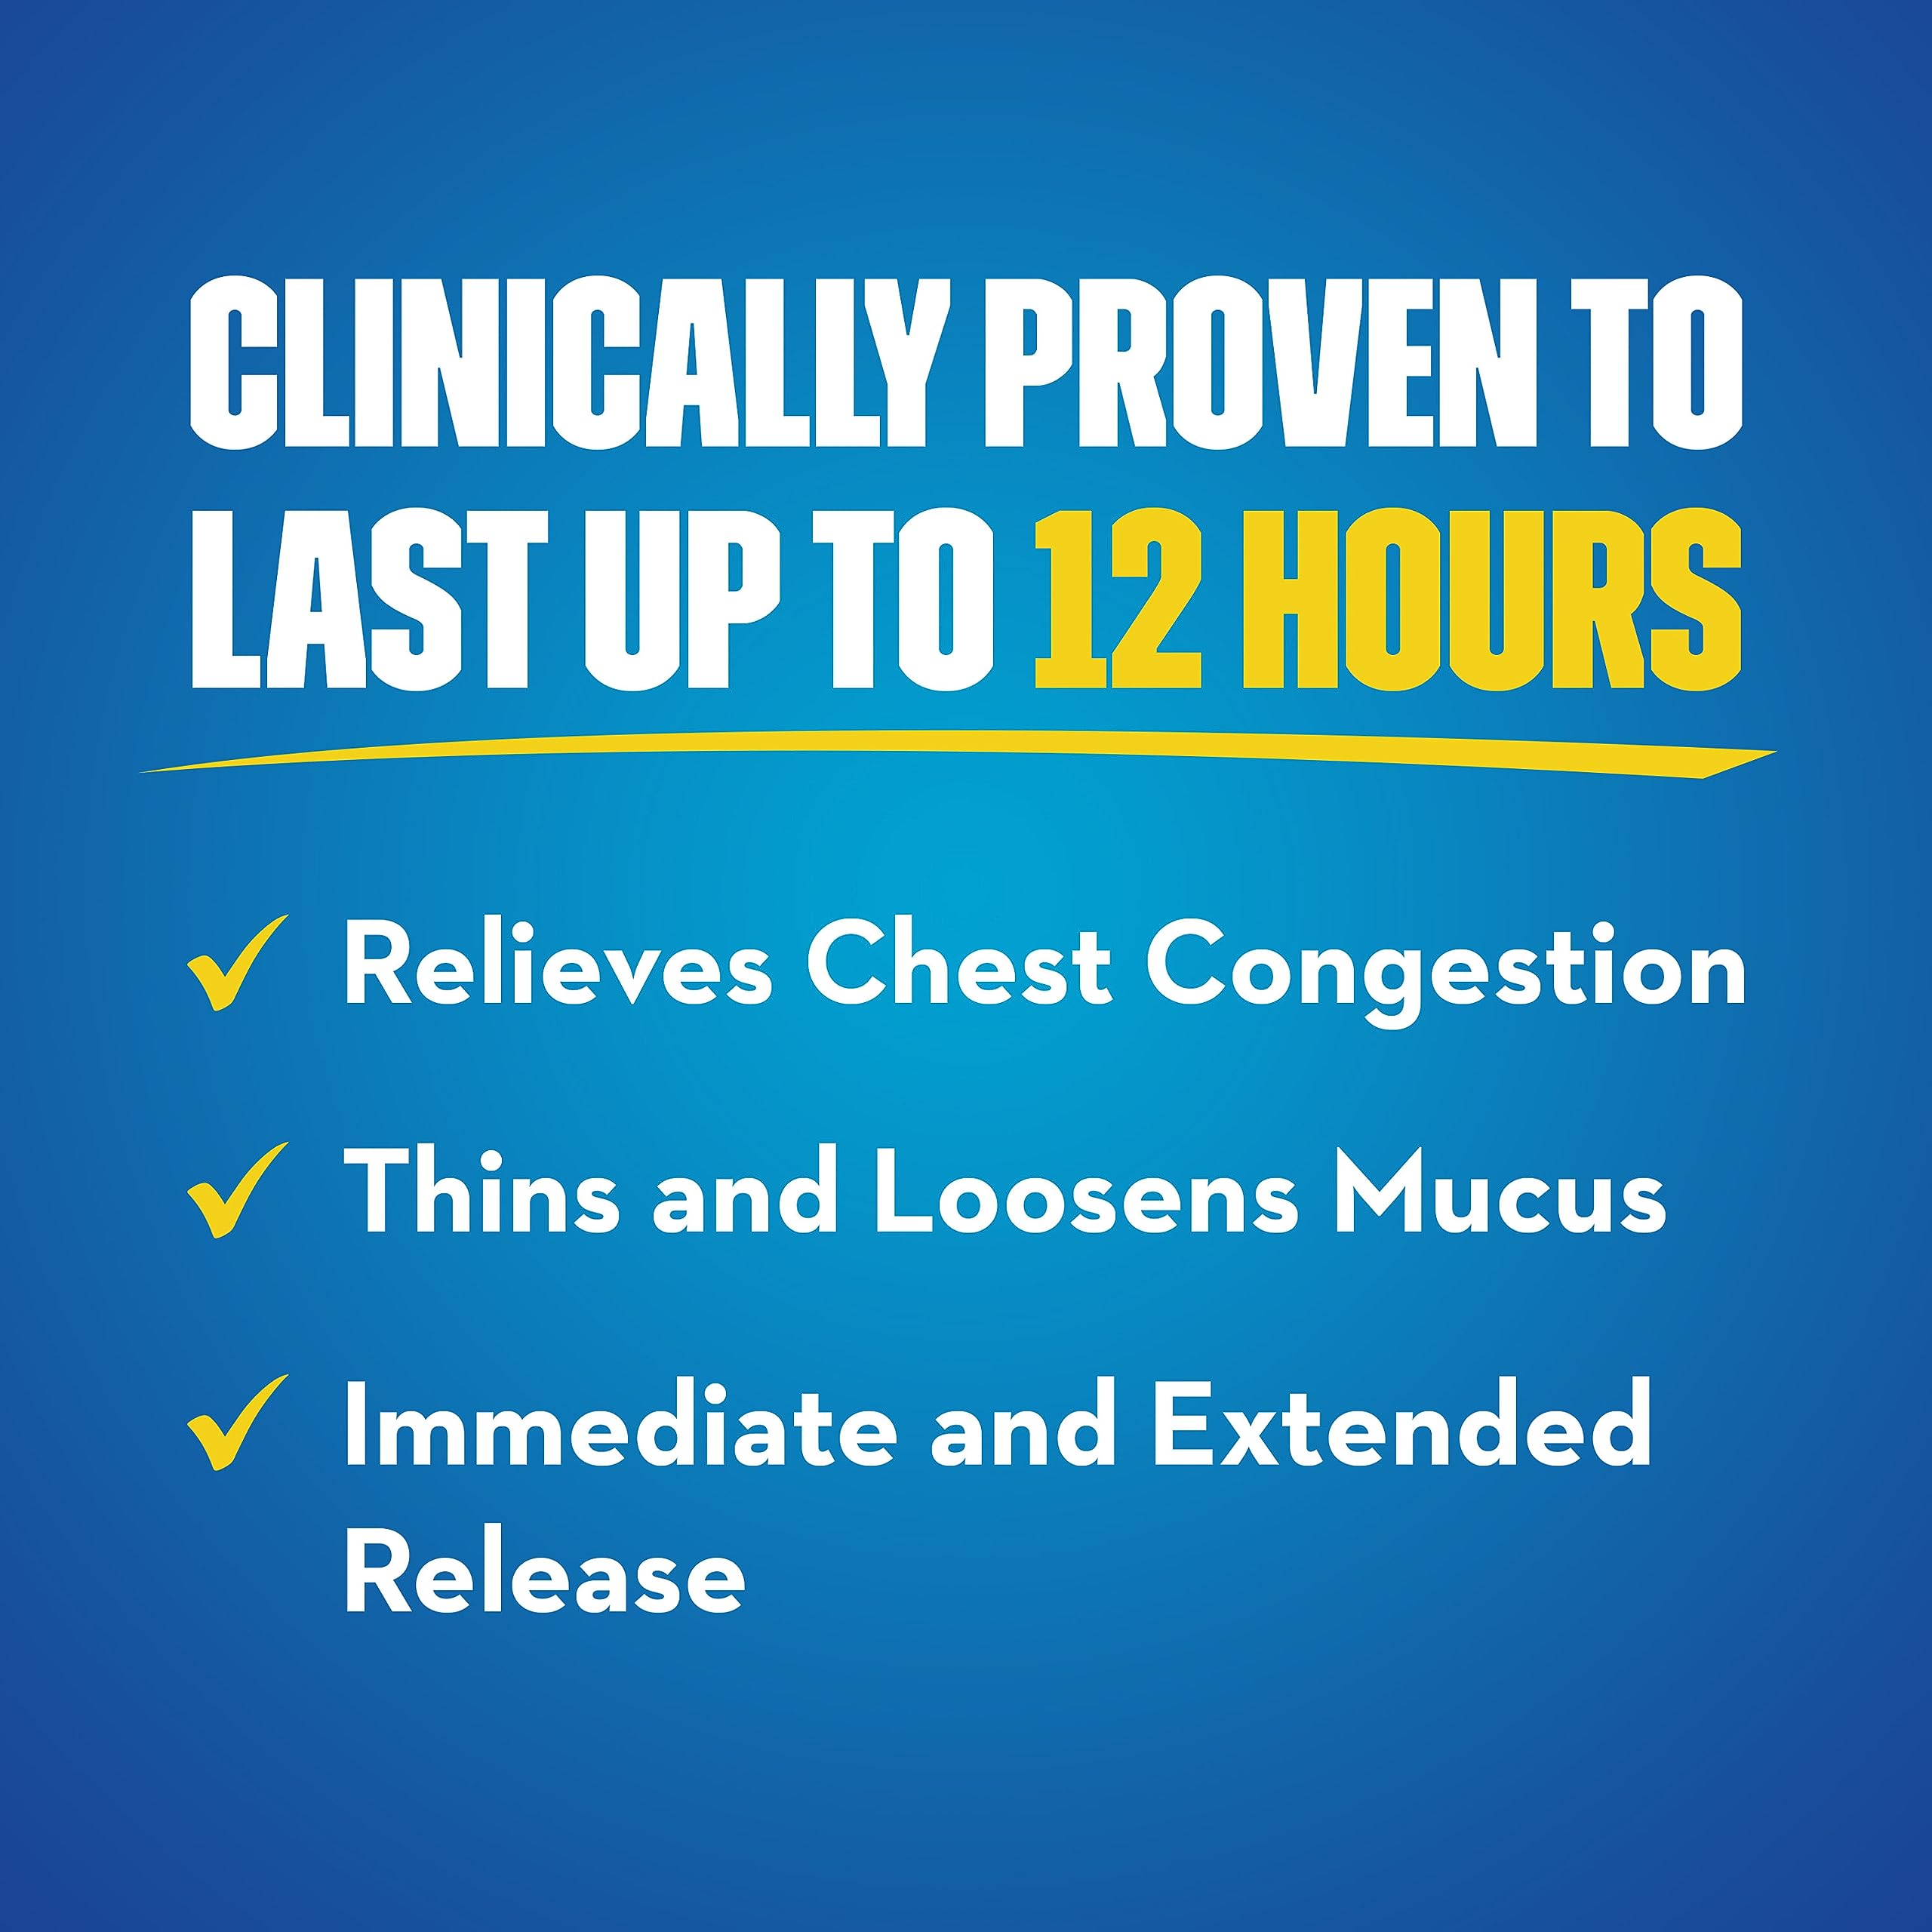 Mucinex Chest Congestion, Maximum Strength 12 Hour Release Tablets, 14ct, 1200 mg Guaifenesin with Extended Relief of Chest Congestion Caused by Excess Mucus, Thins and loosens Mucus (Pack of 2)